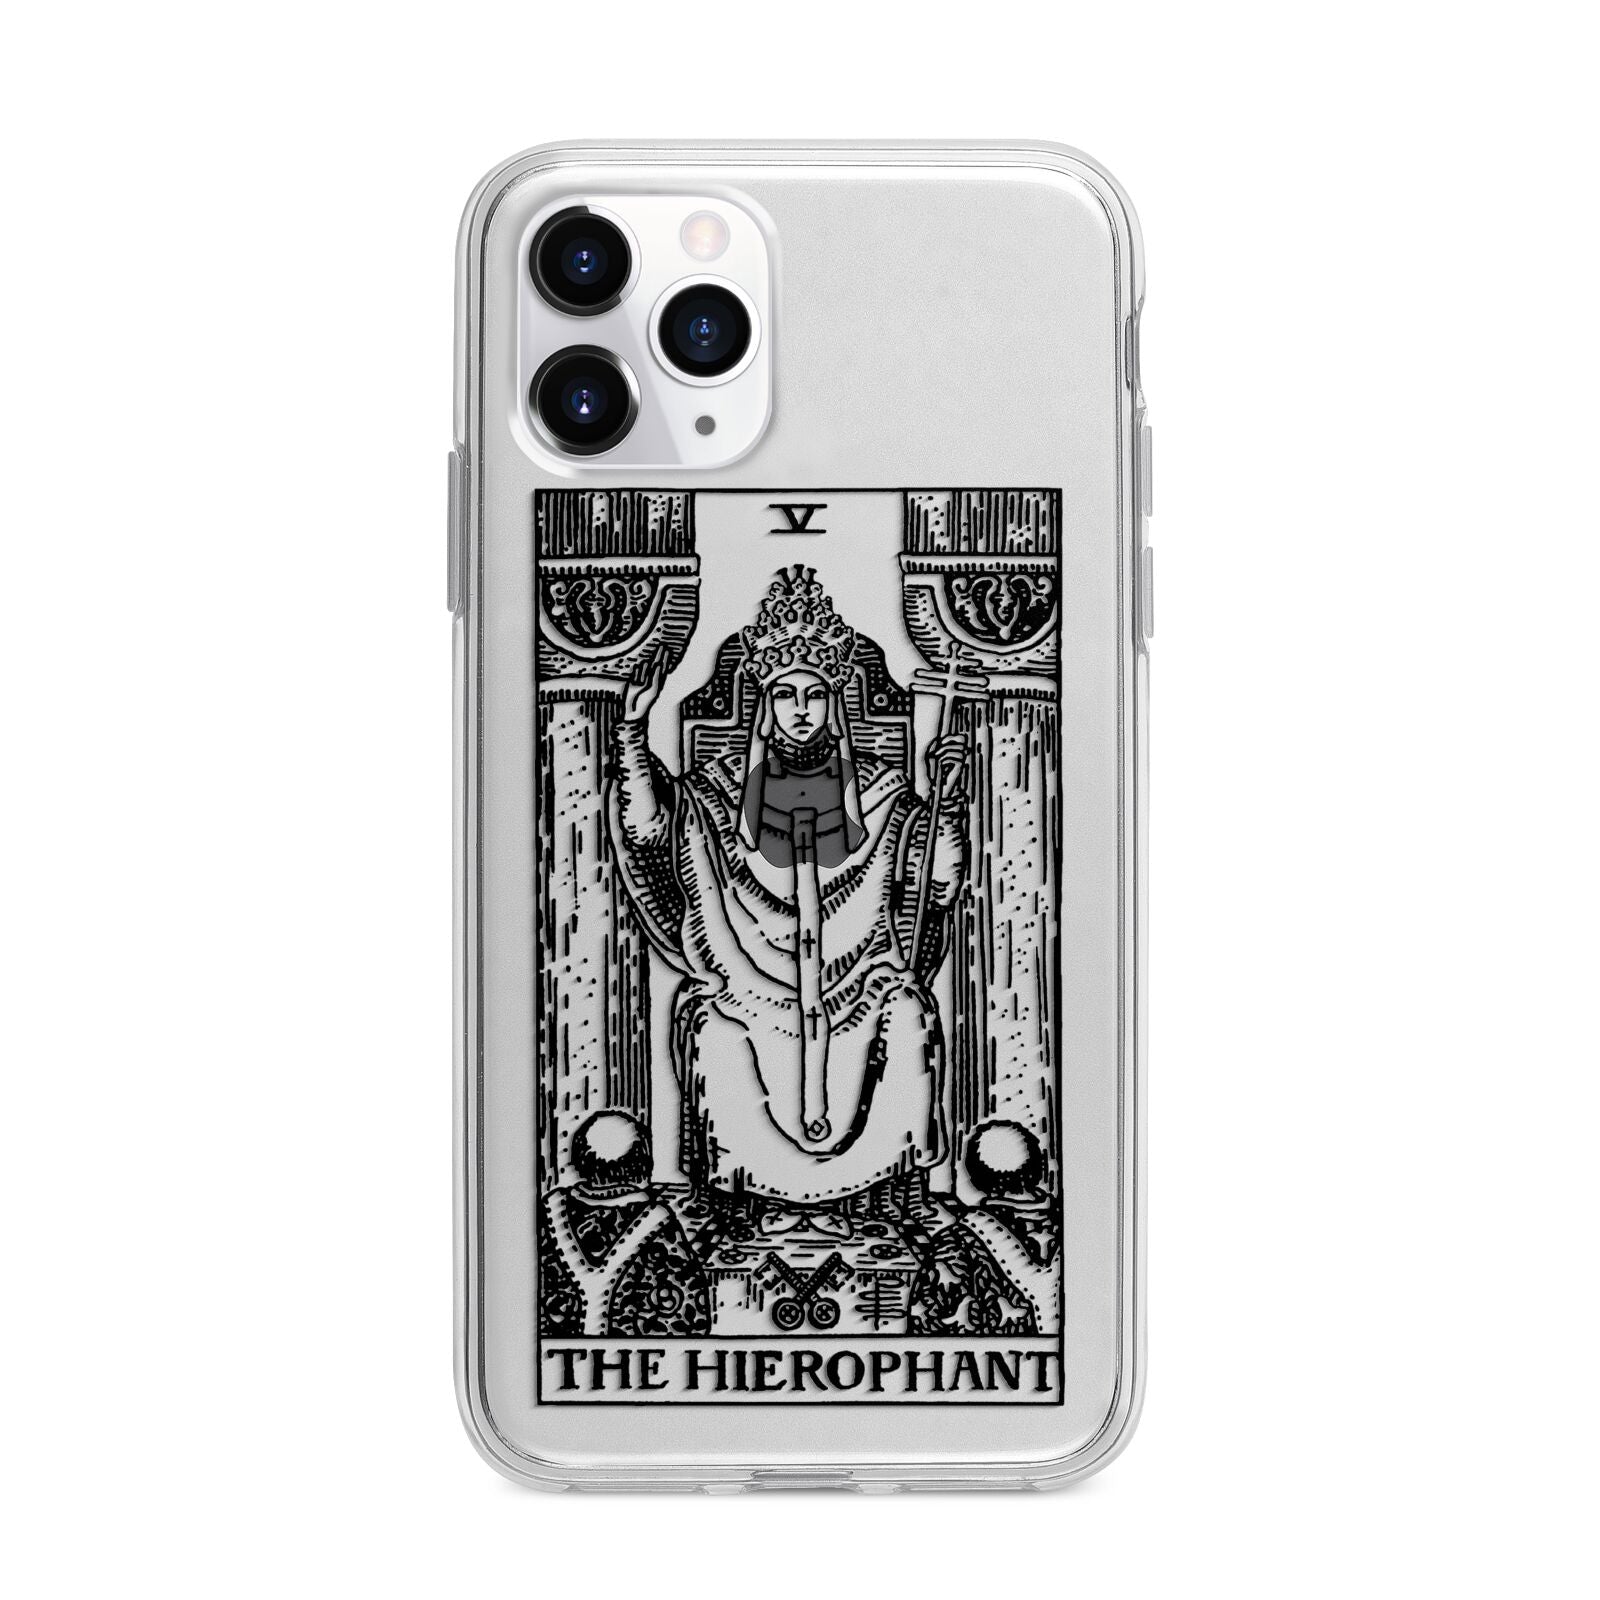 The Hierophant Monochrome Tarot Card Apple iPhone 11 Pro Max in Silver with Bumper Case